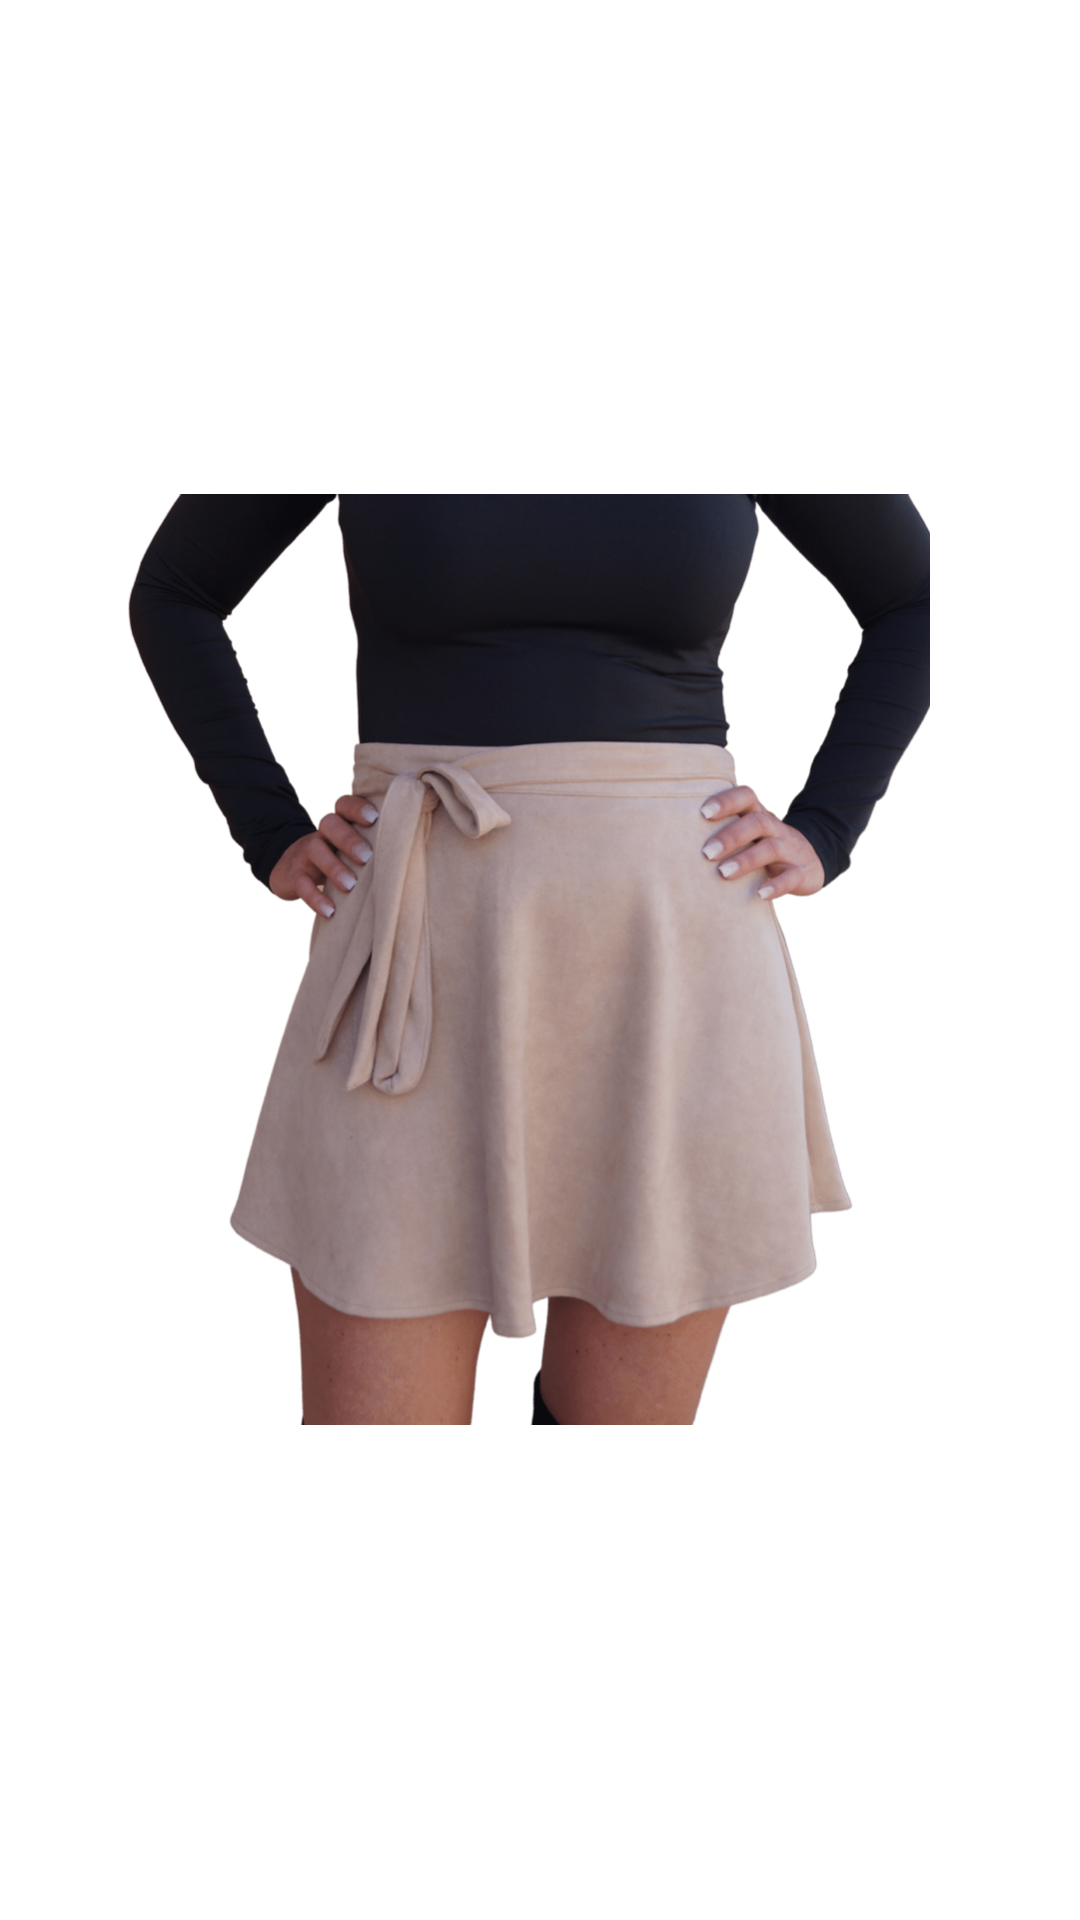 kleid, fashion, mode, look, outfit, Kleidung, outfitliebe, design, pullover, gestreifter pullover, pollunder damen, teddy pullover damen, pullover beige, cropped pullover, Langarmbody, Body mit Spitze, Damenbody, Body für Damen, Body für Frauen, Kurzarmbo